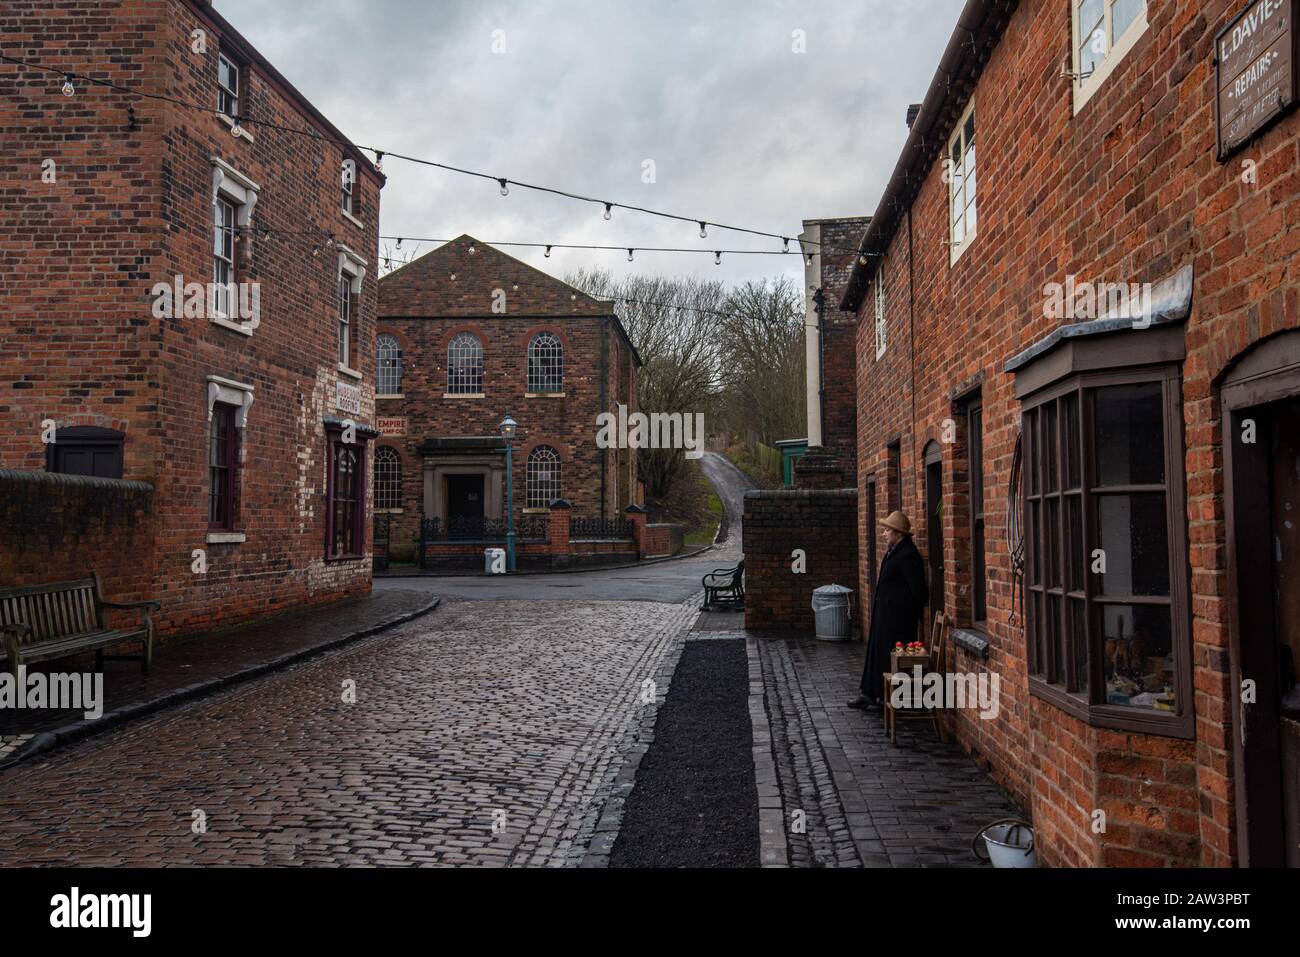 Dudley, United Kingdom - 12 19 2019: Black country living museum reflects recreated  Victorian period, expanded coal industry, industrial revolution t Stock Photo